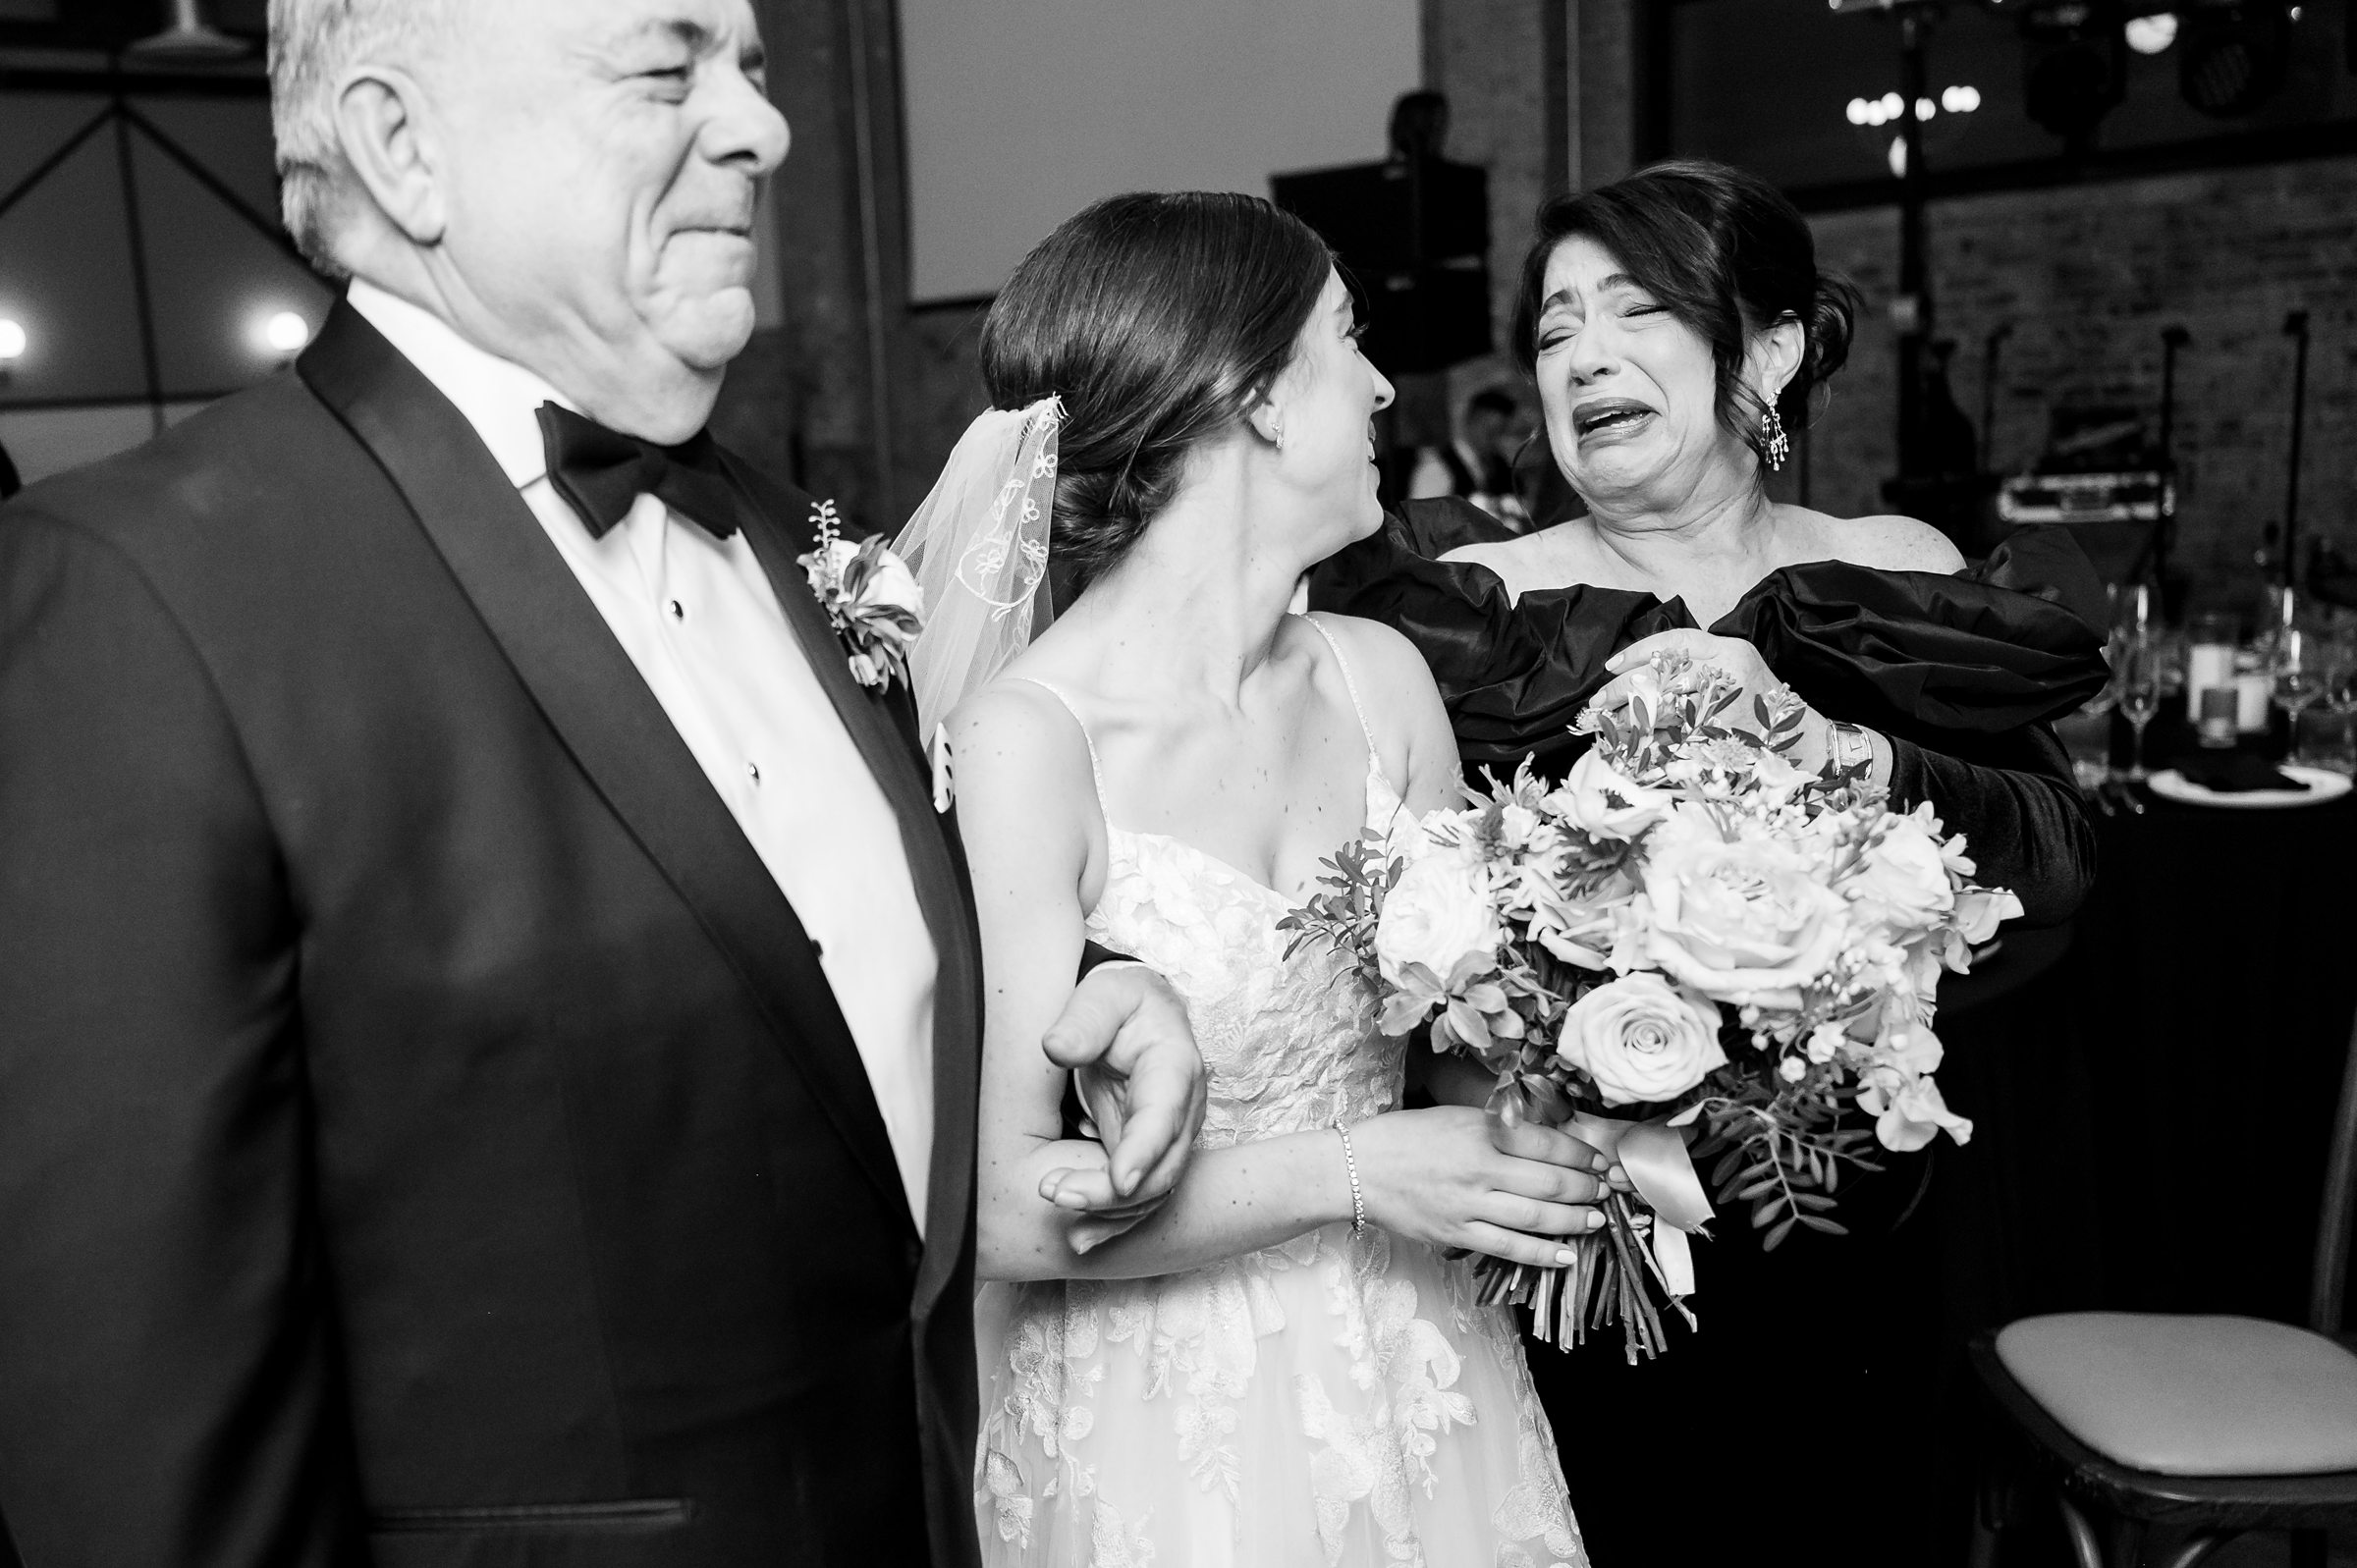 At a Lilah wedding, the bride walks down the aisle with her father.